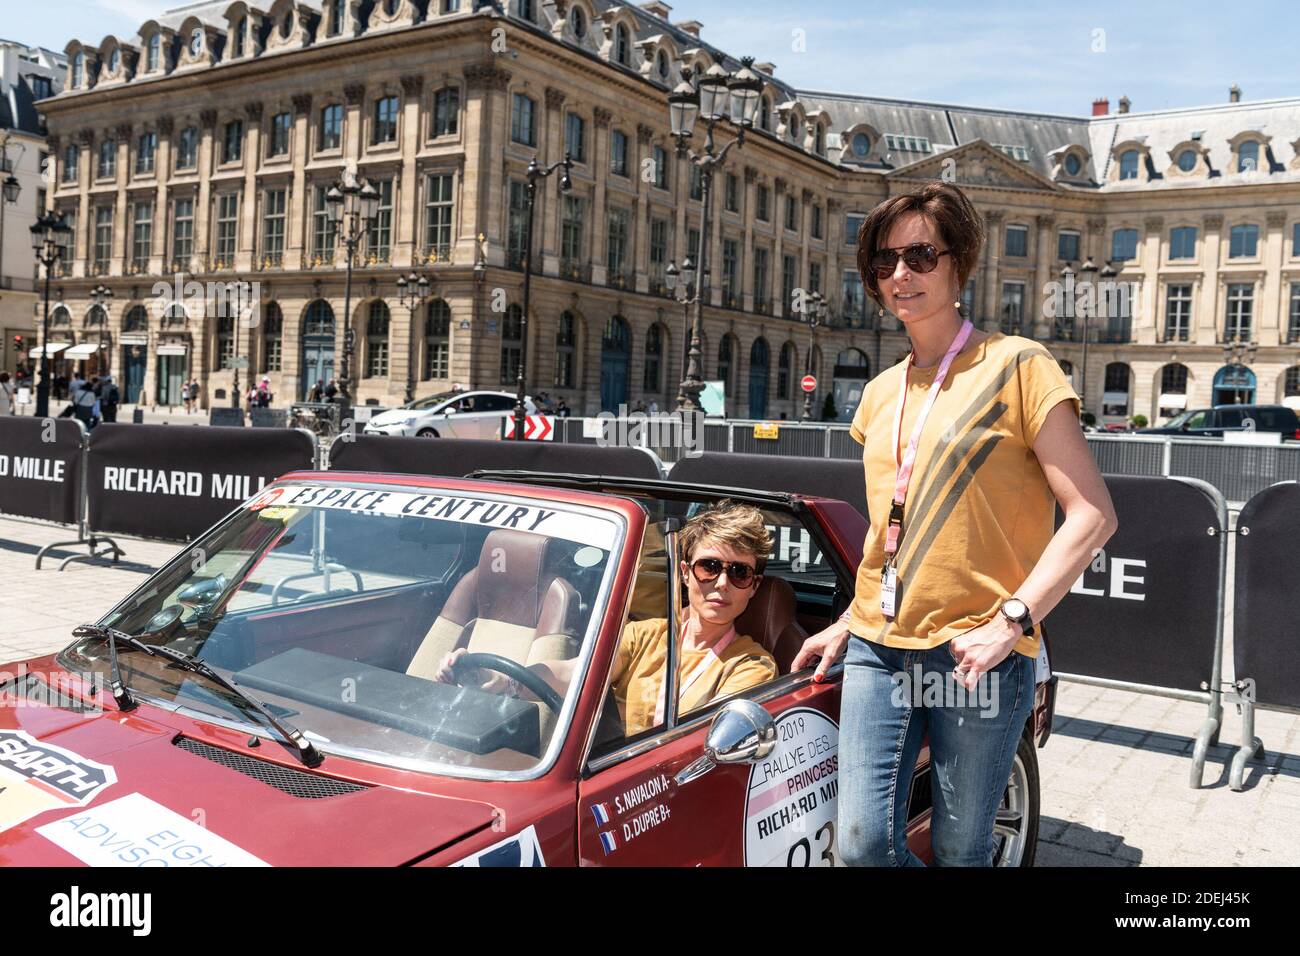 Stephanie Navalon (in car) and Delphine Dupre) drive a 1979 Fiat X1/9 on the 20th edition of the Rallye des Princesses 'Princesses' Rally', a 5 days motorrace for women only on vintage cars, starts on June 2nd from Paris to reach Saint Tropez on June 6th. Teams register and present the cars on the 1st of June on Place Vendôme, Paris, France, June 1st 2019. Photo by Daniel Derajinski/ABACAPRESS.COM Stock Photo